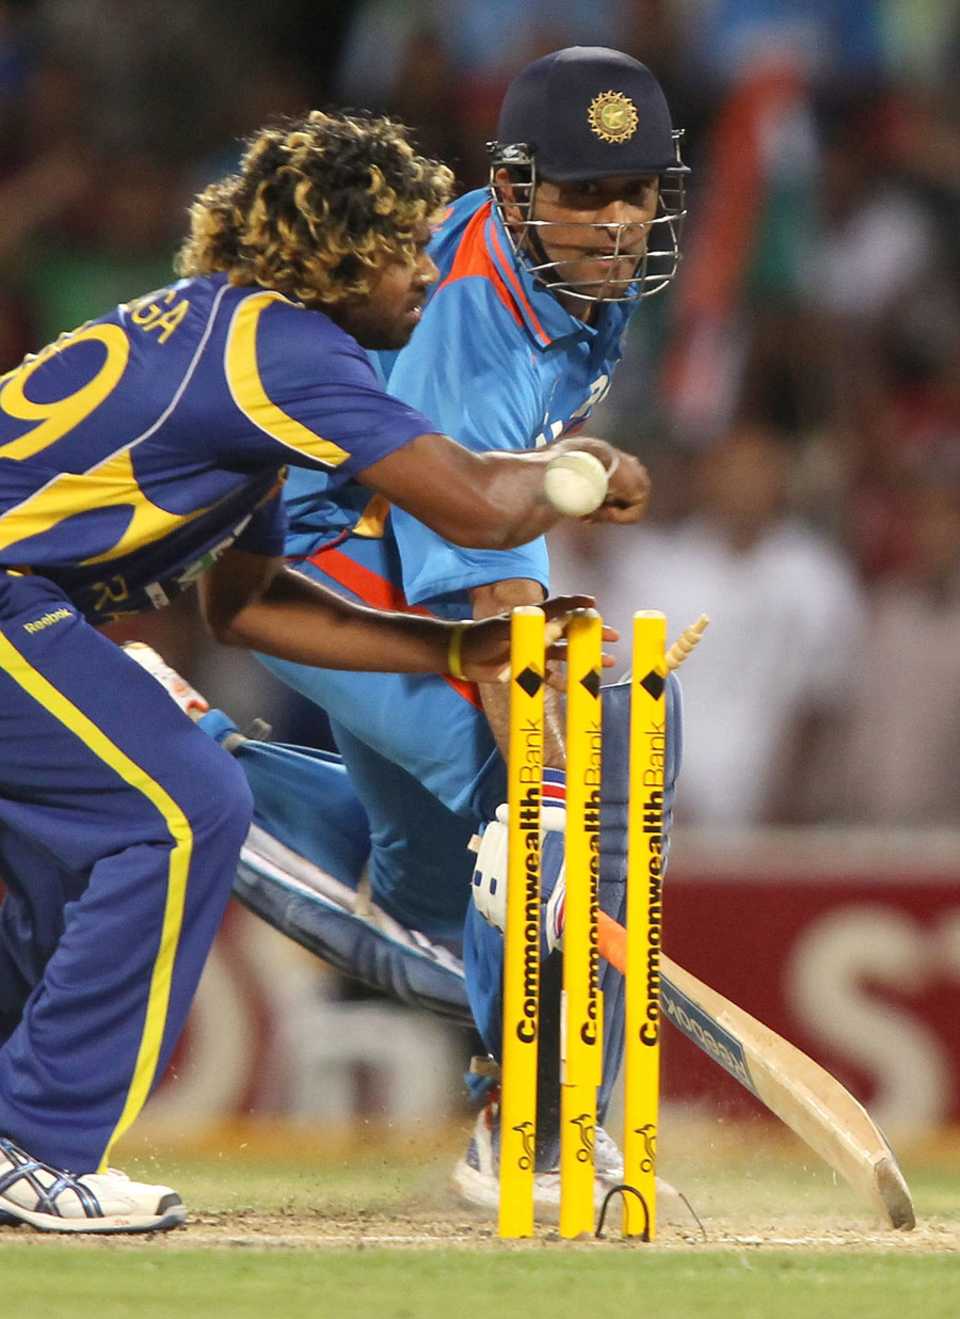 Lasith Malinga misses a chance to run out MS Dhoni in the final over, India v Sri Lanka, Commonwealth Bank Series, Adelaide, February 14, 2012